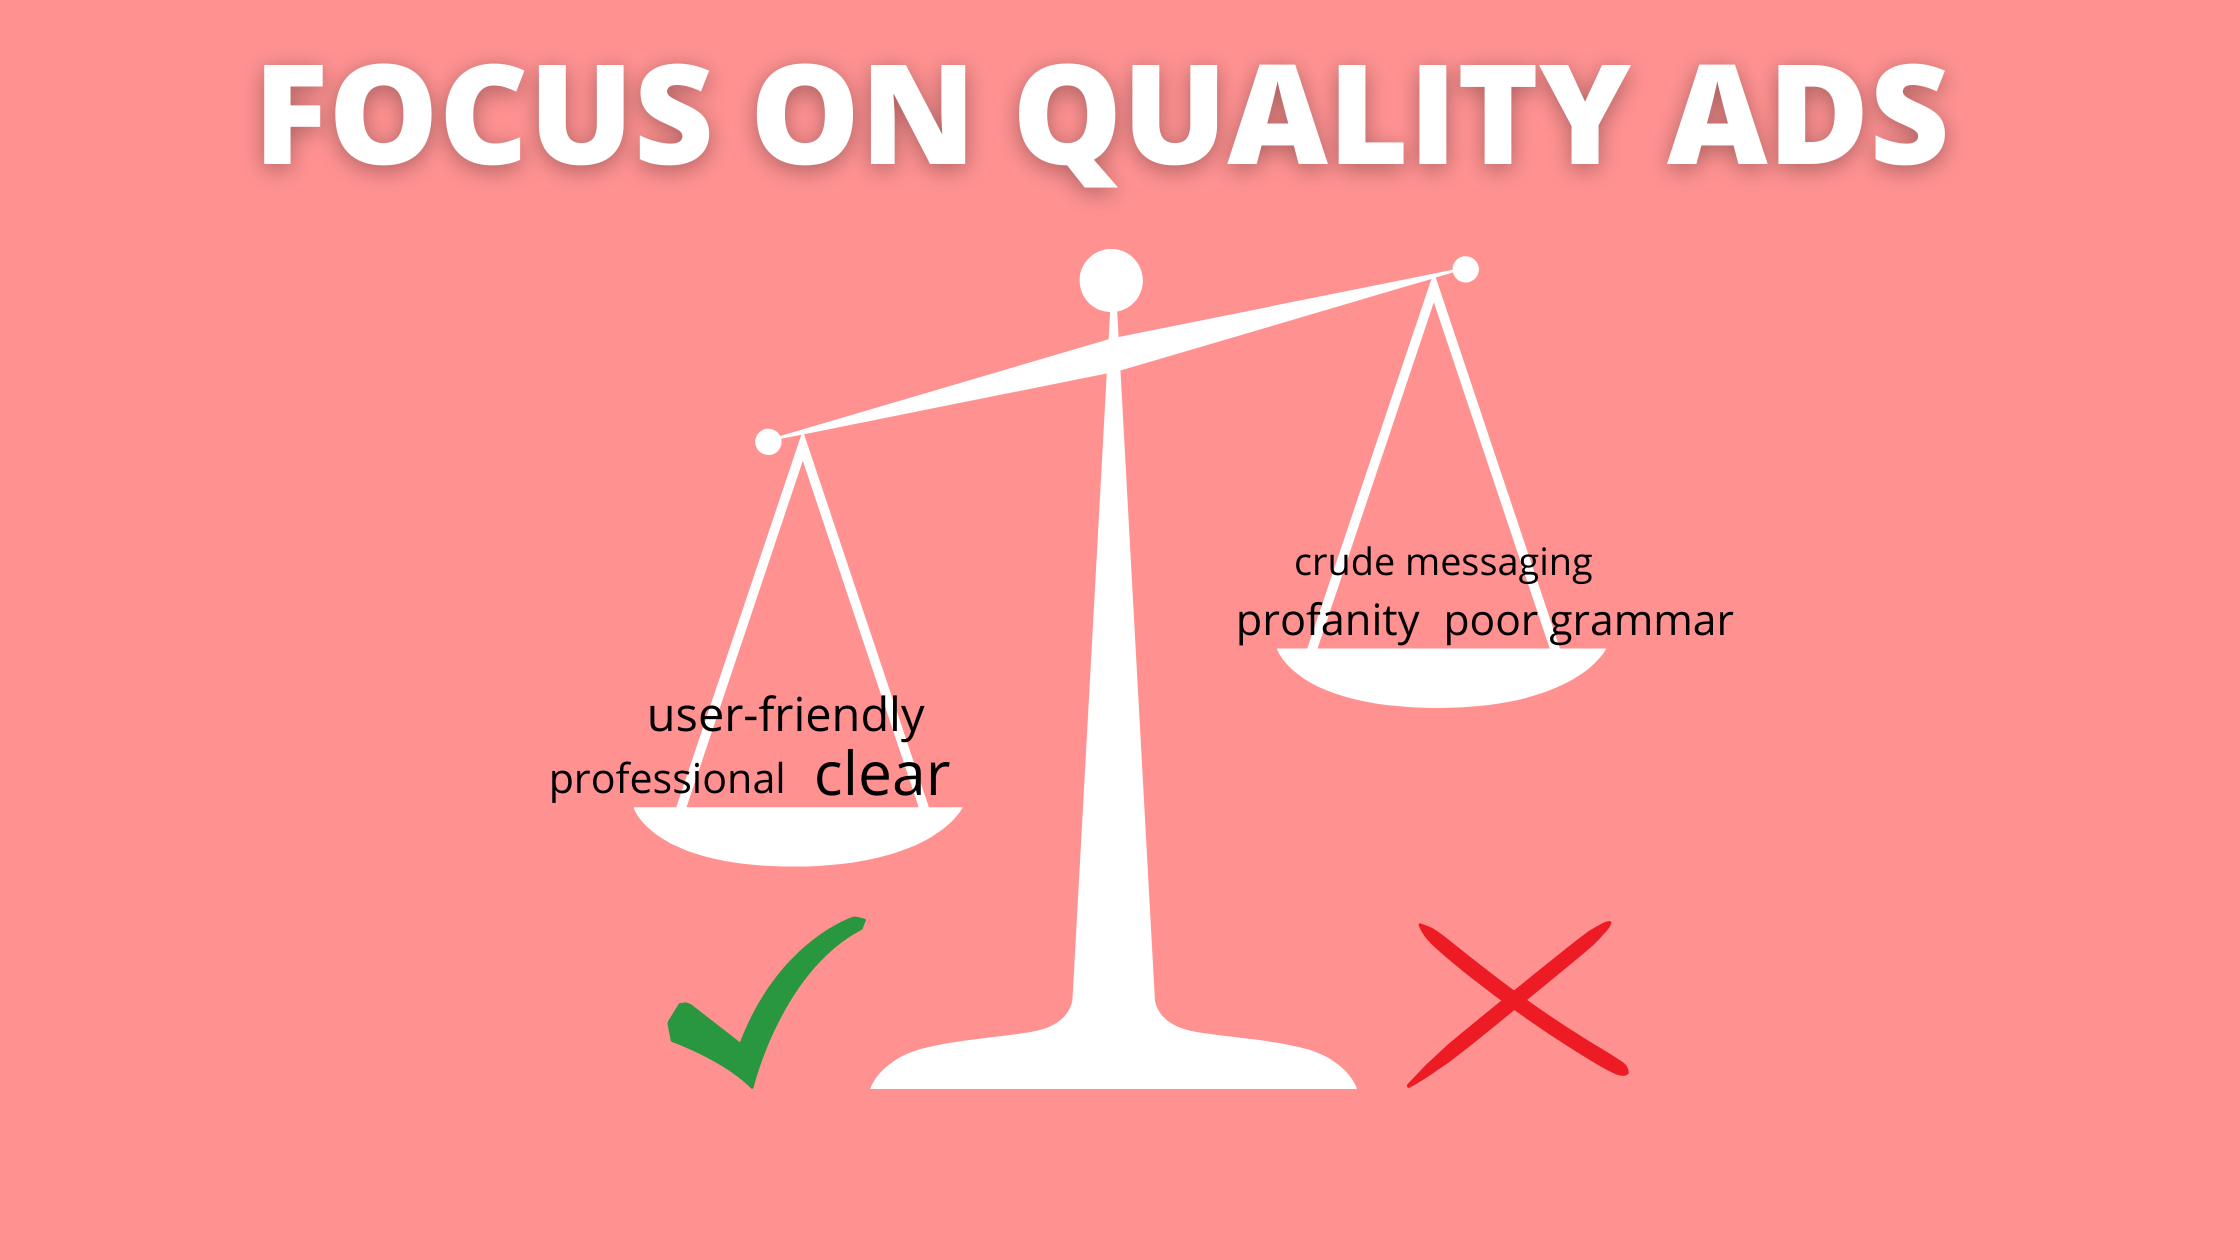 Focus on quality ads to pass the Facebook review process